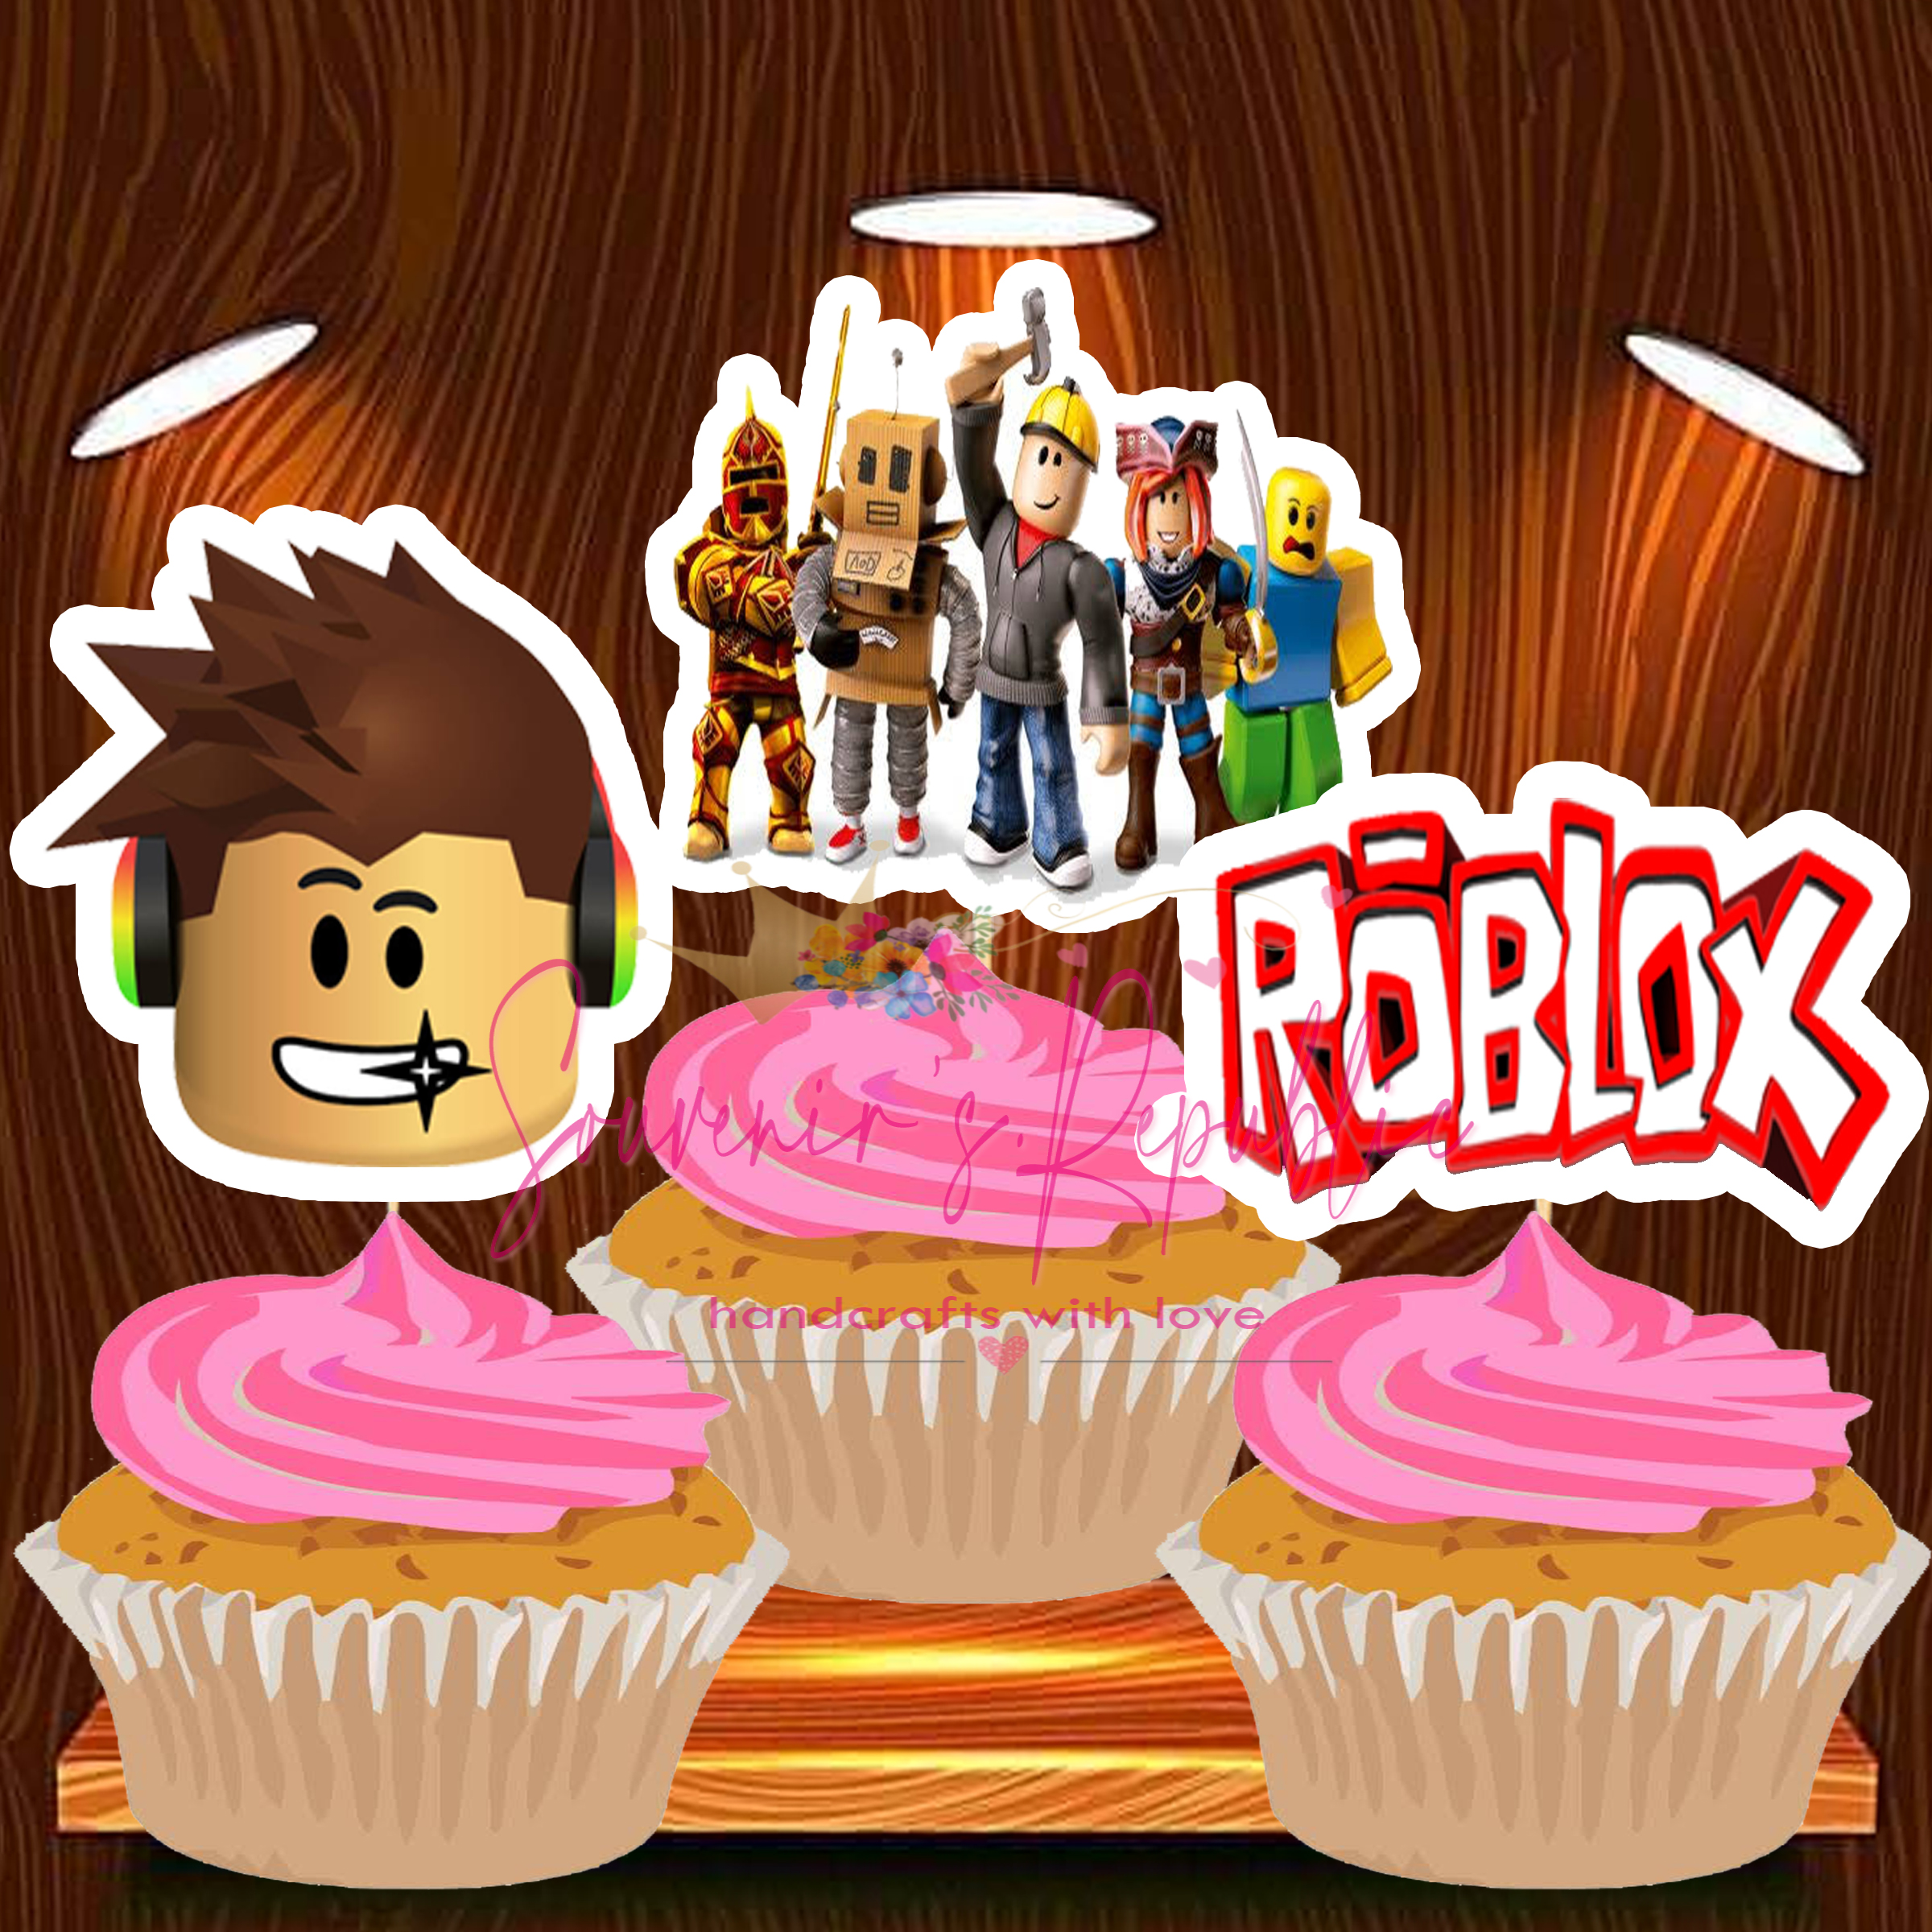 Roblox Cupcake Topper 24 Pcs Buy Sell Online Cake Tiered Stands With Cheap Price Lazada Ph - roblox cupcake toppers printable